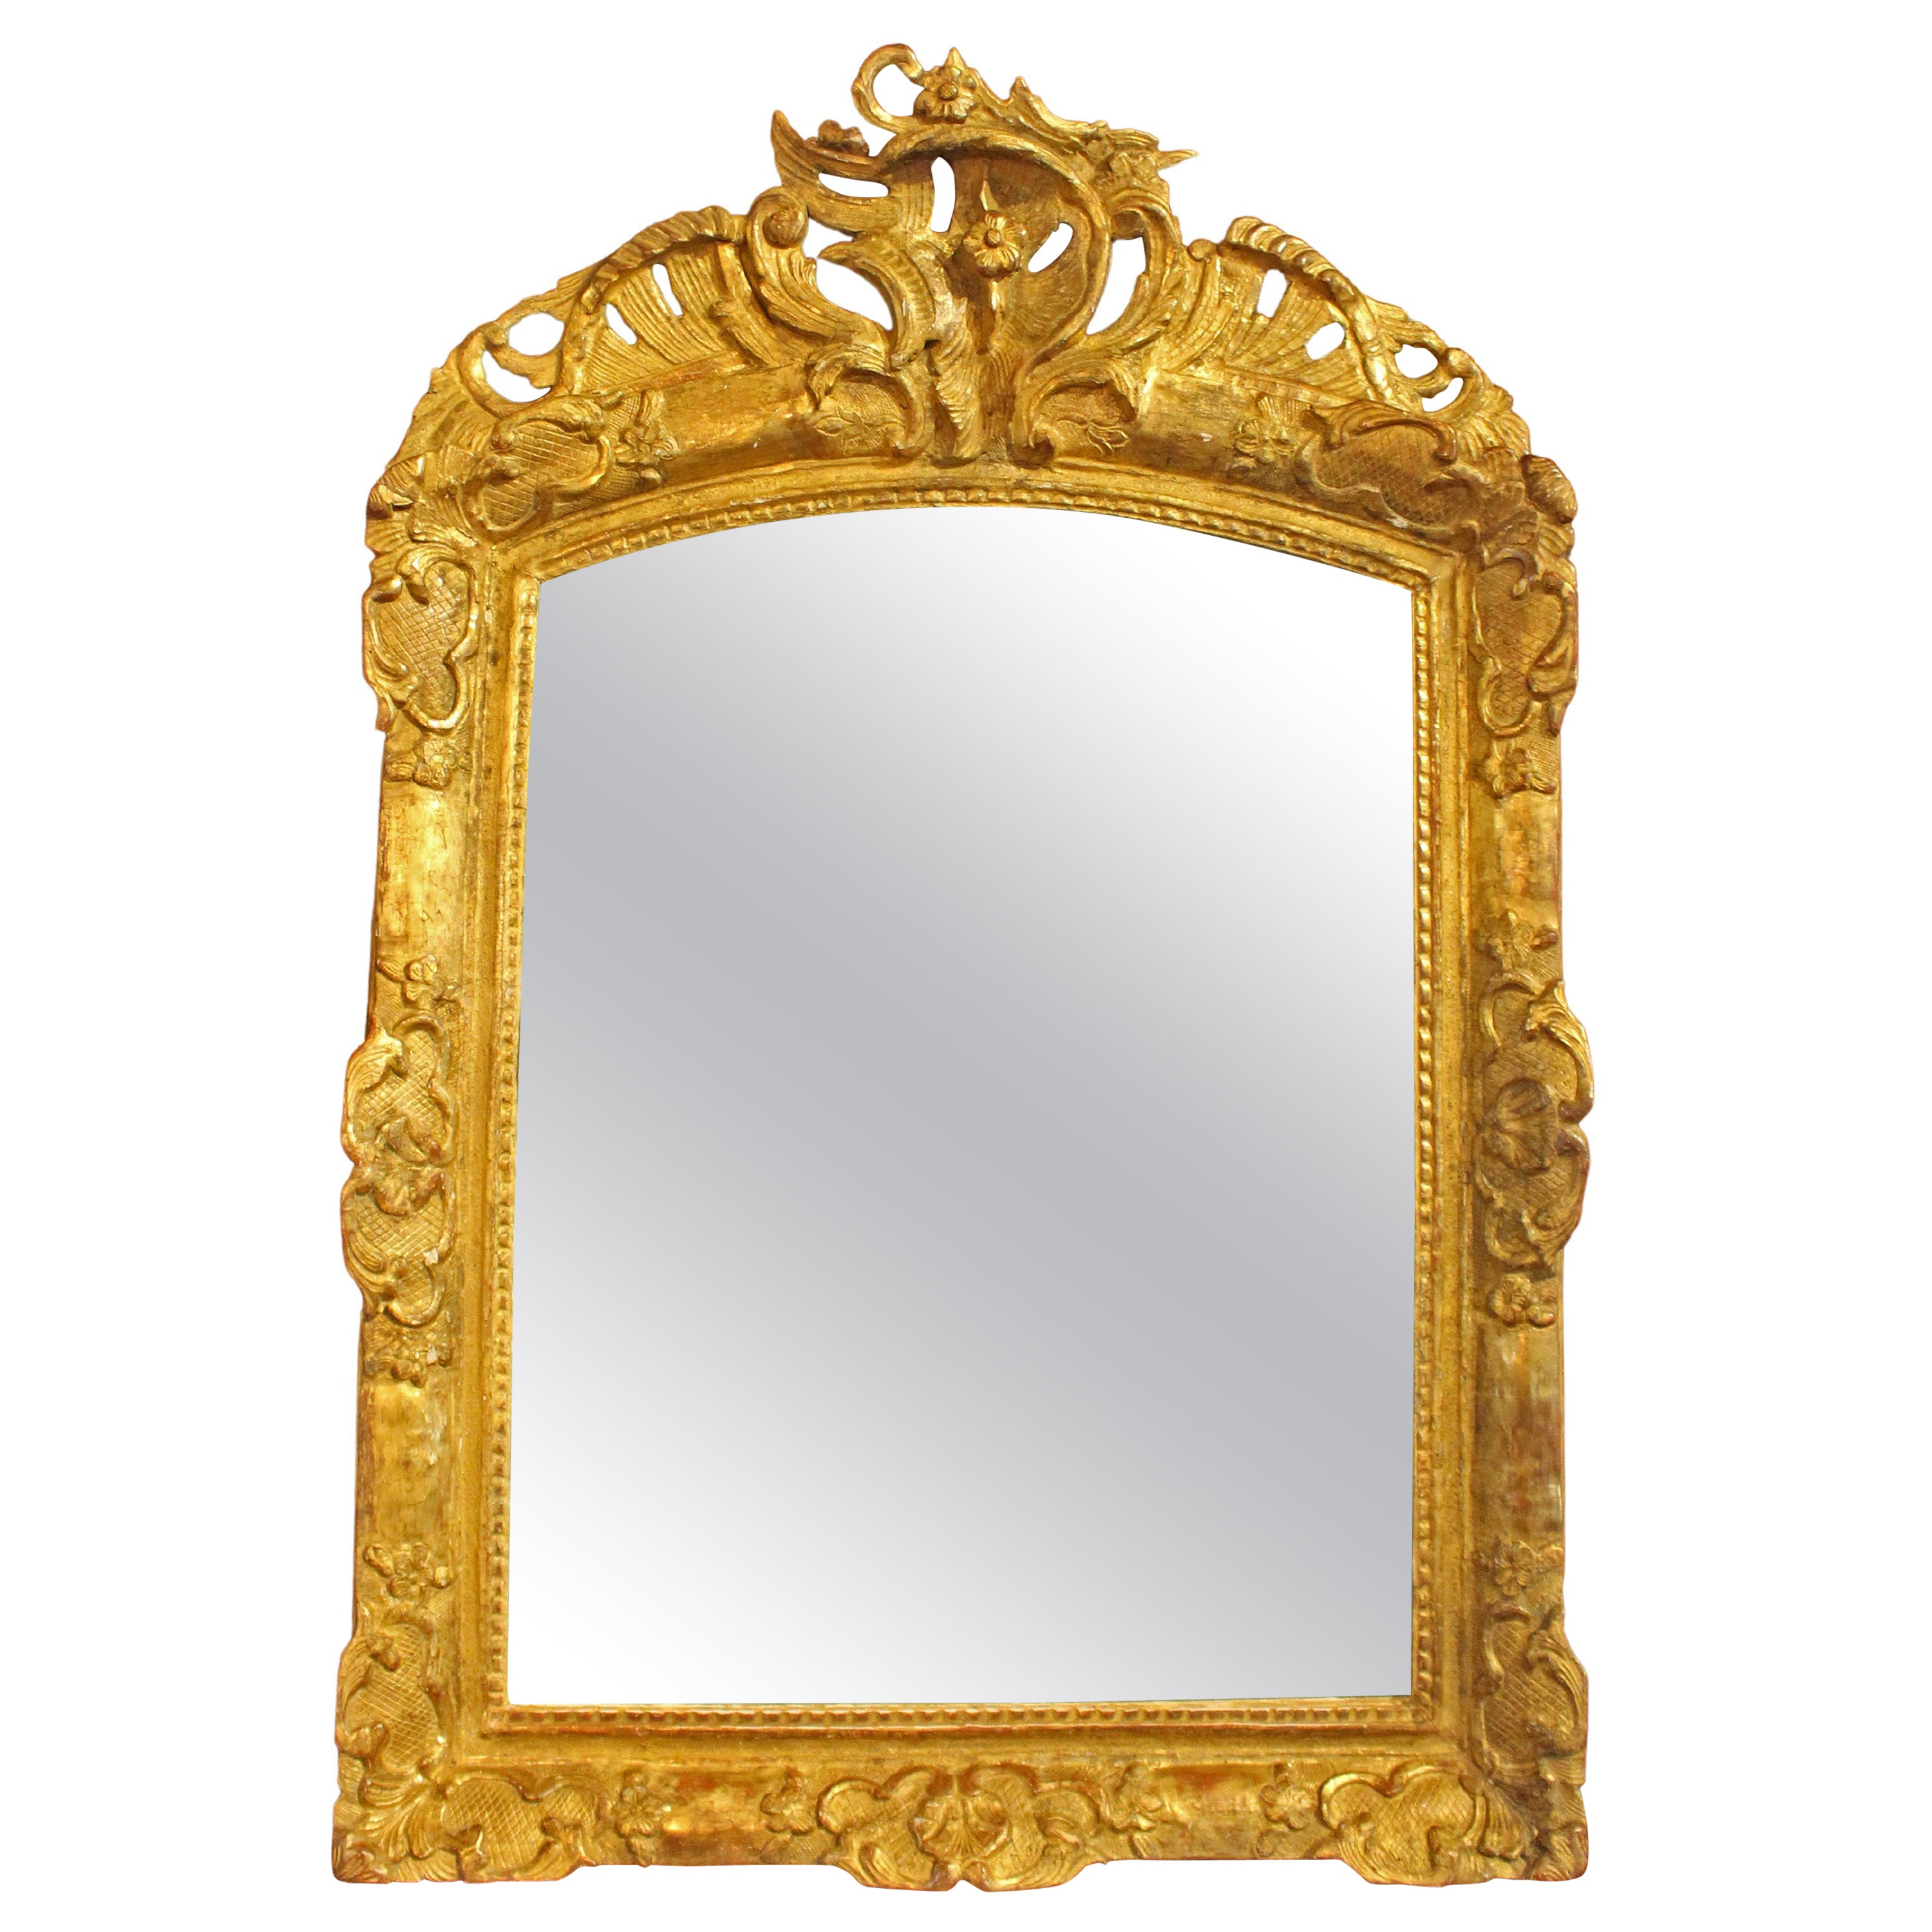 Circa 1860 French Carved & Gilt Wood Mirror For Sale